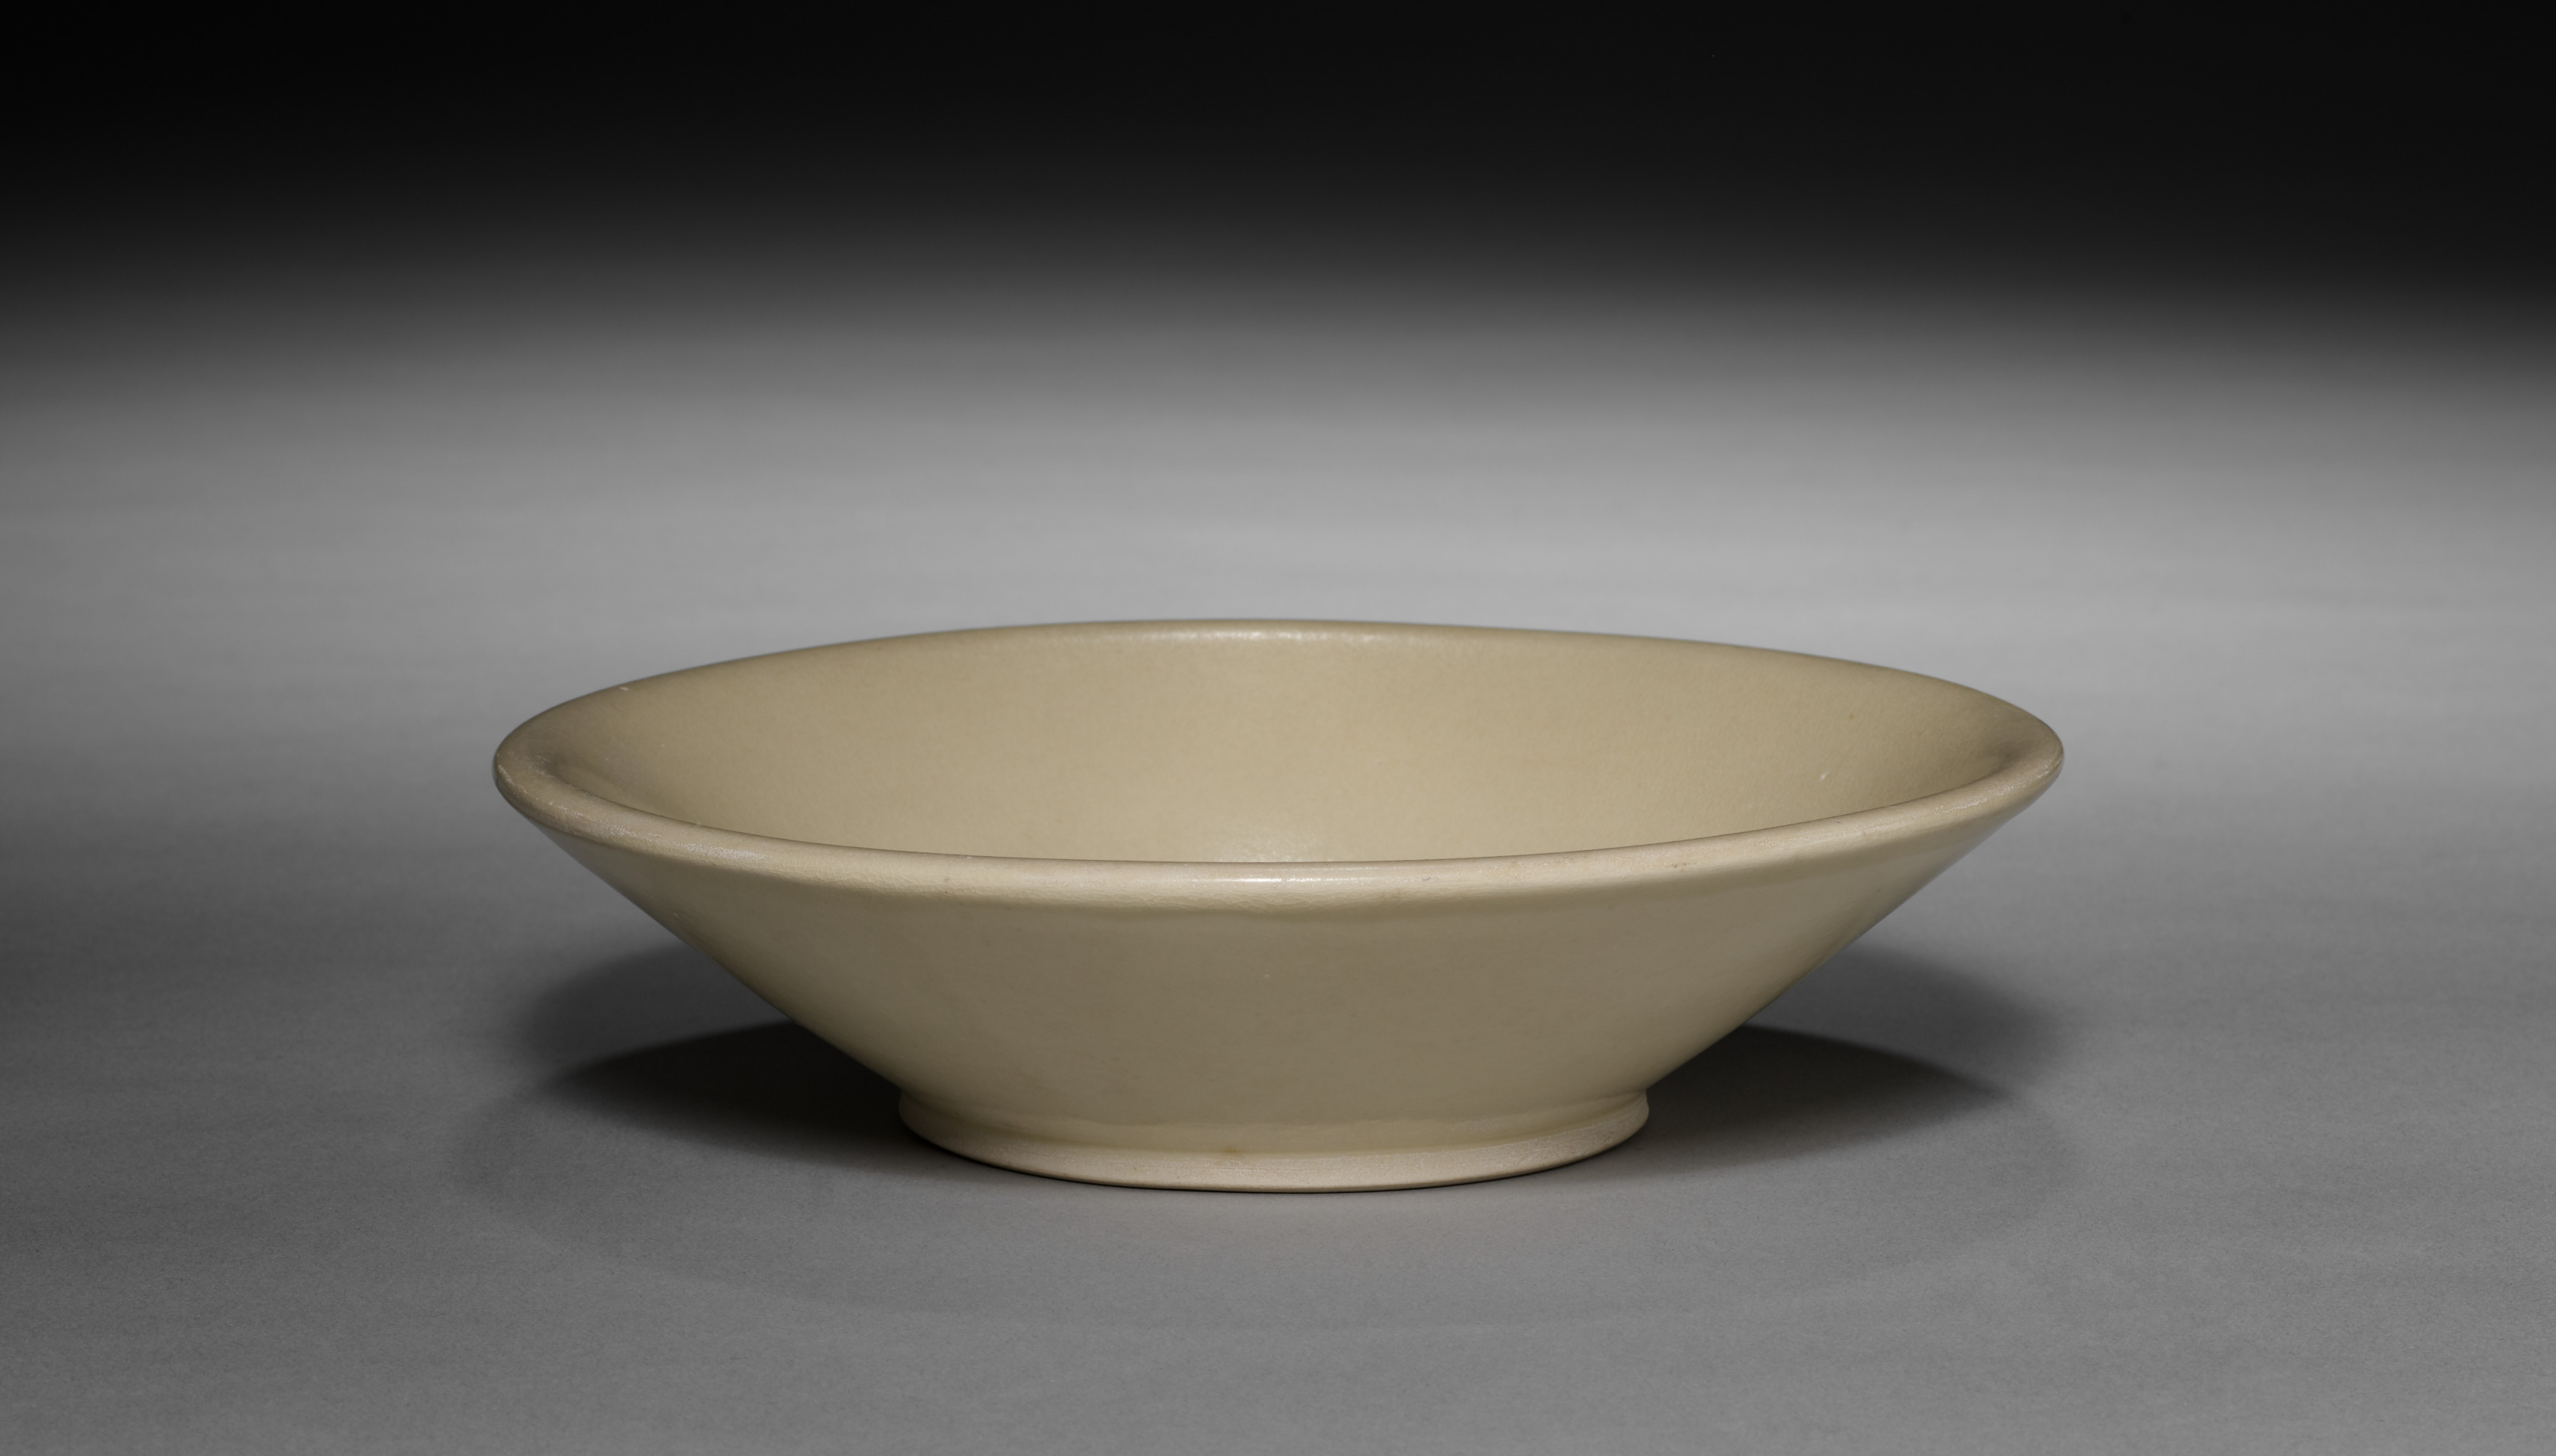 Ding Ware Bowl of the Xing Type with Bi-Disc Foot